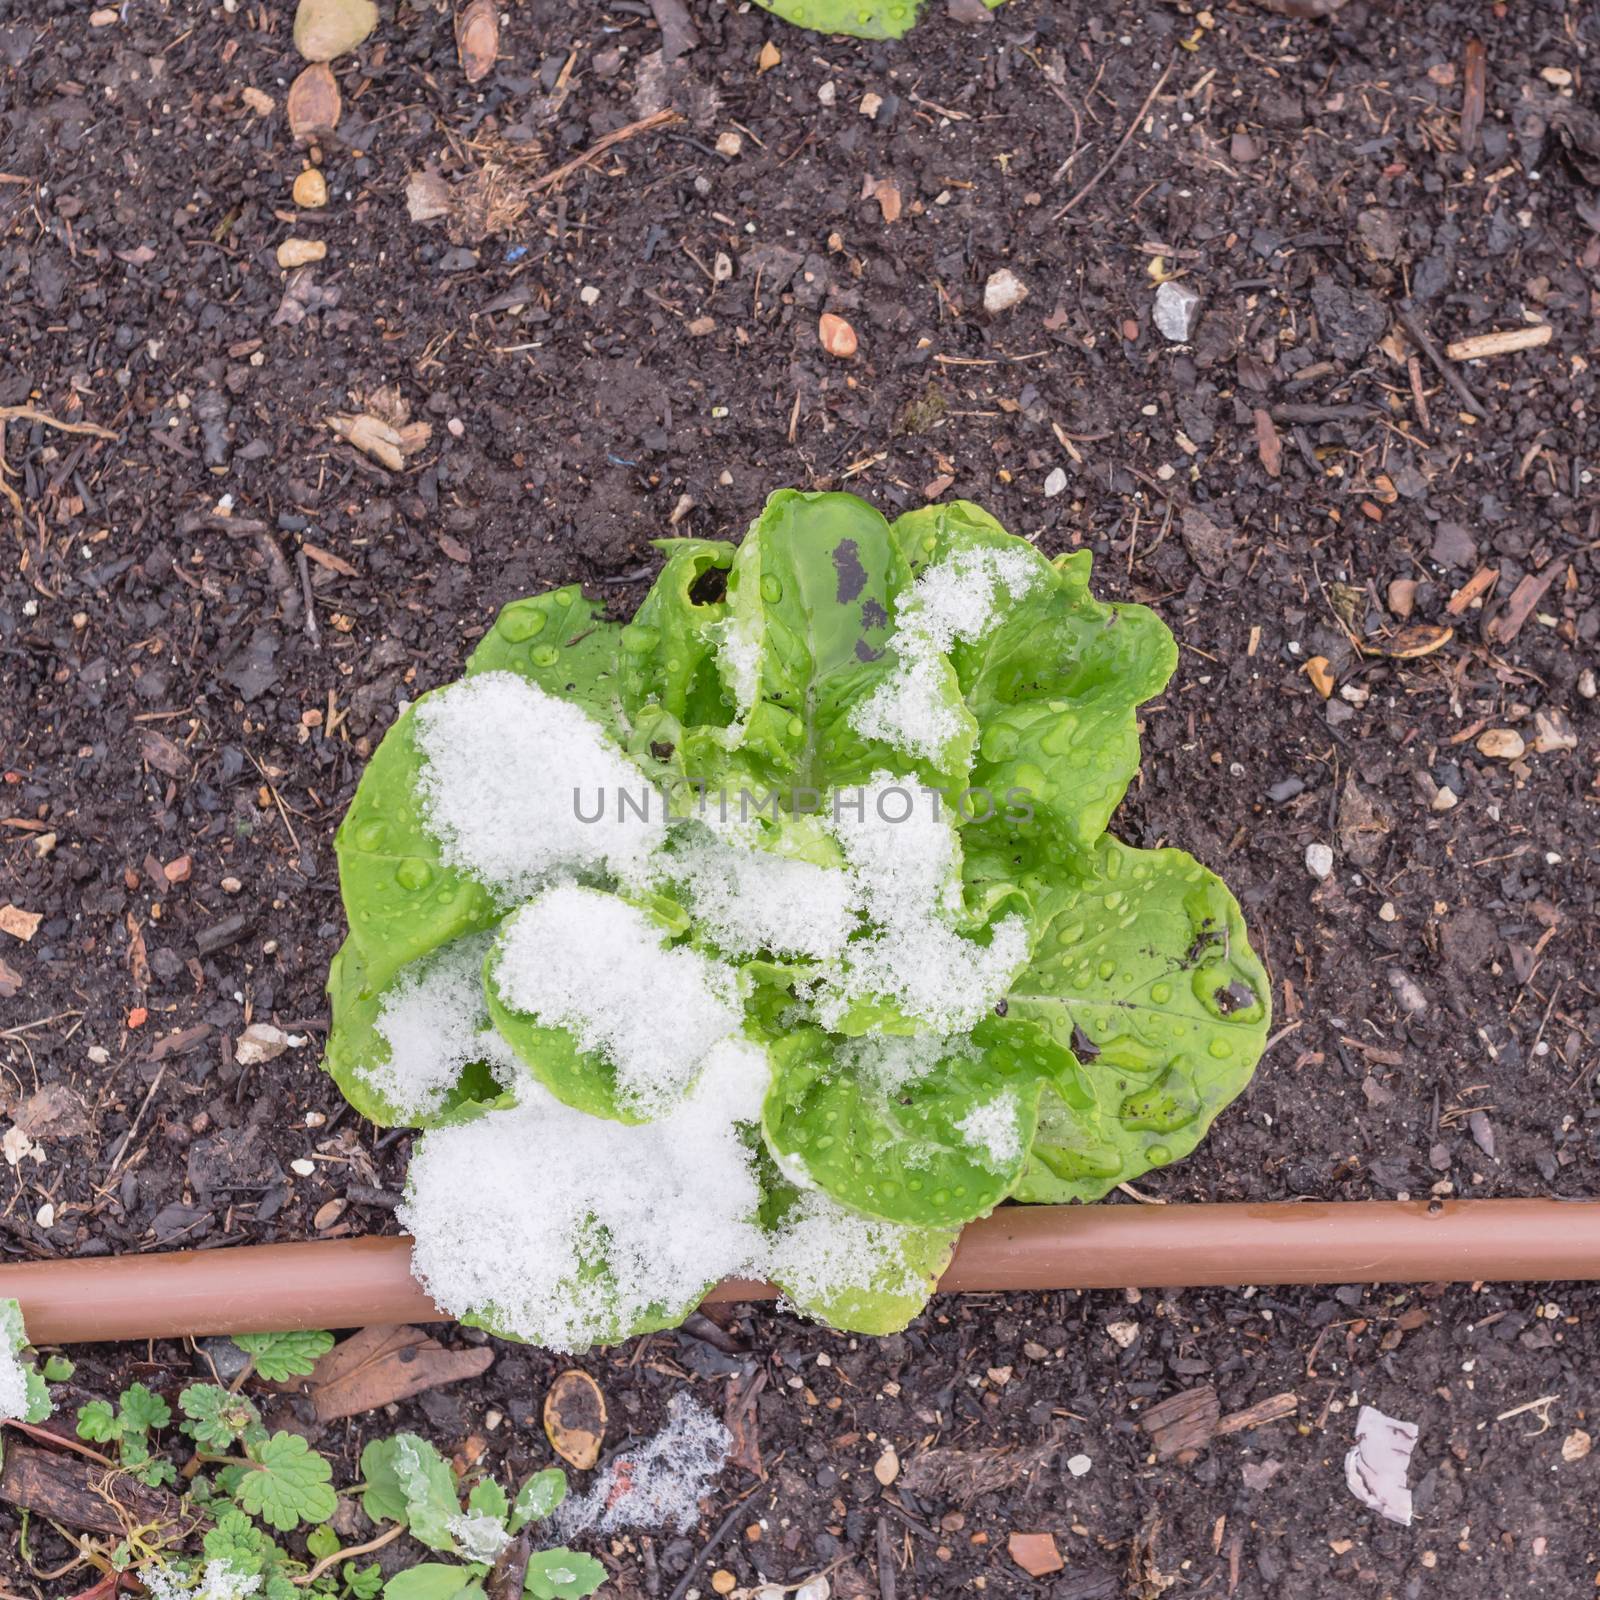 One lettuce plant under snow covered at raised bed garden near Dallas, Texas, USA by trongnguyen